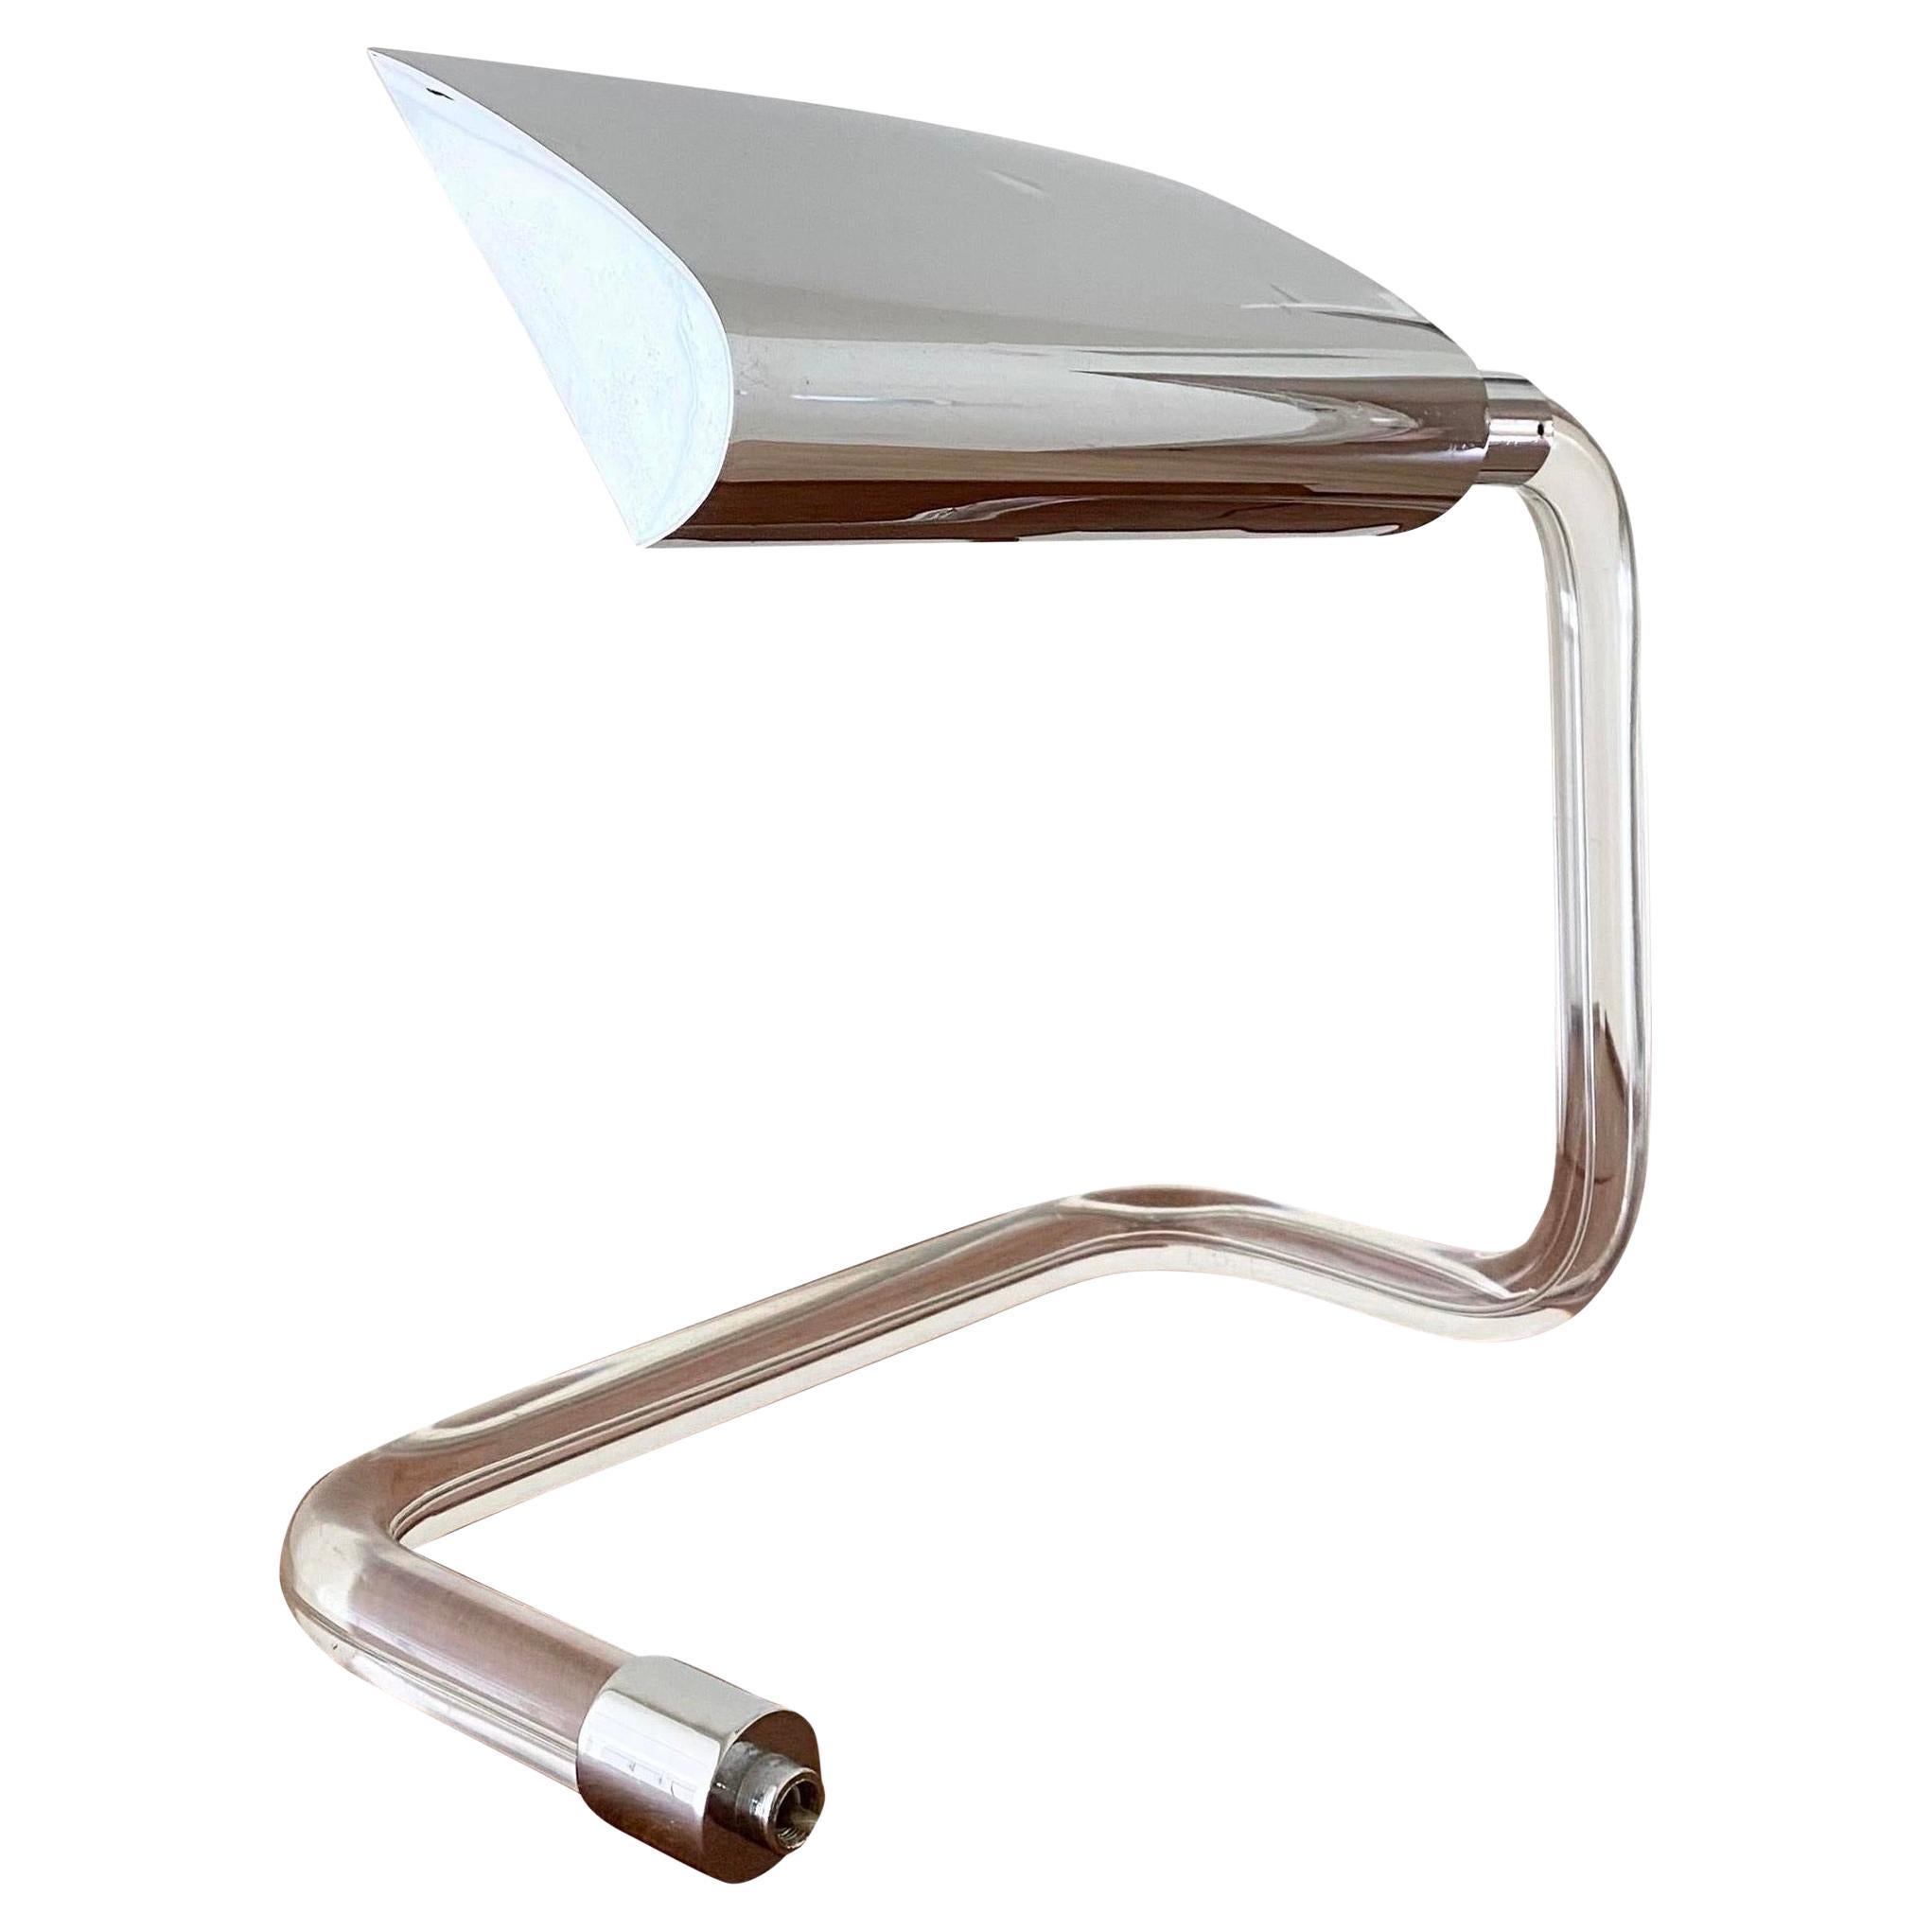 Futuristic Peter Hamburger Lucite & Chrome Lamp Produced by Kovacs for Knoll